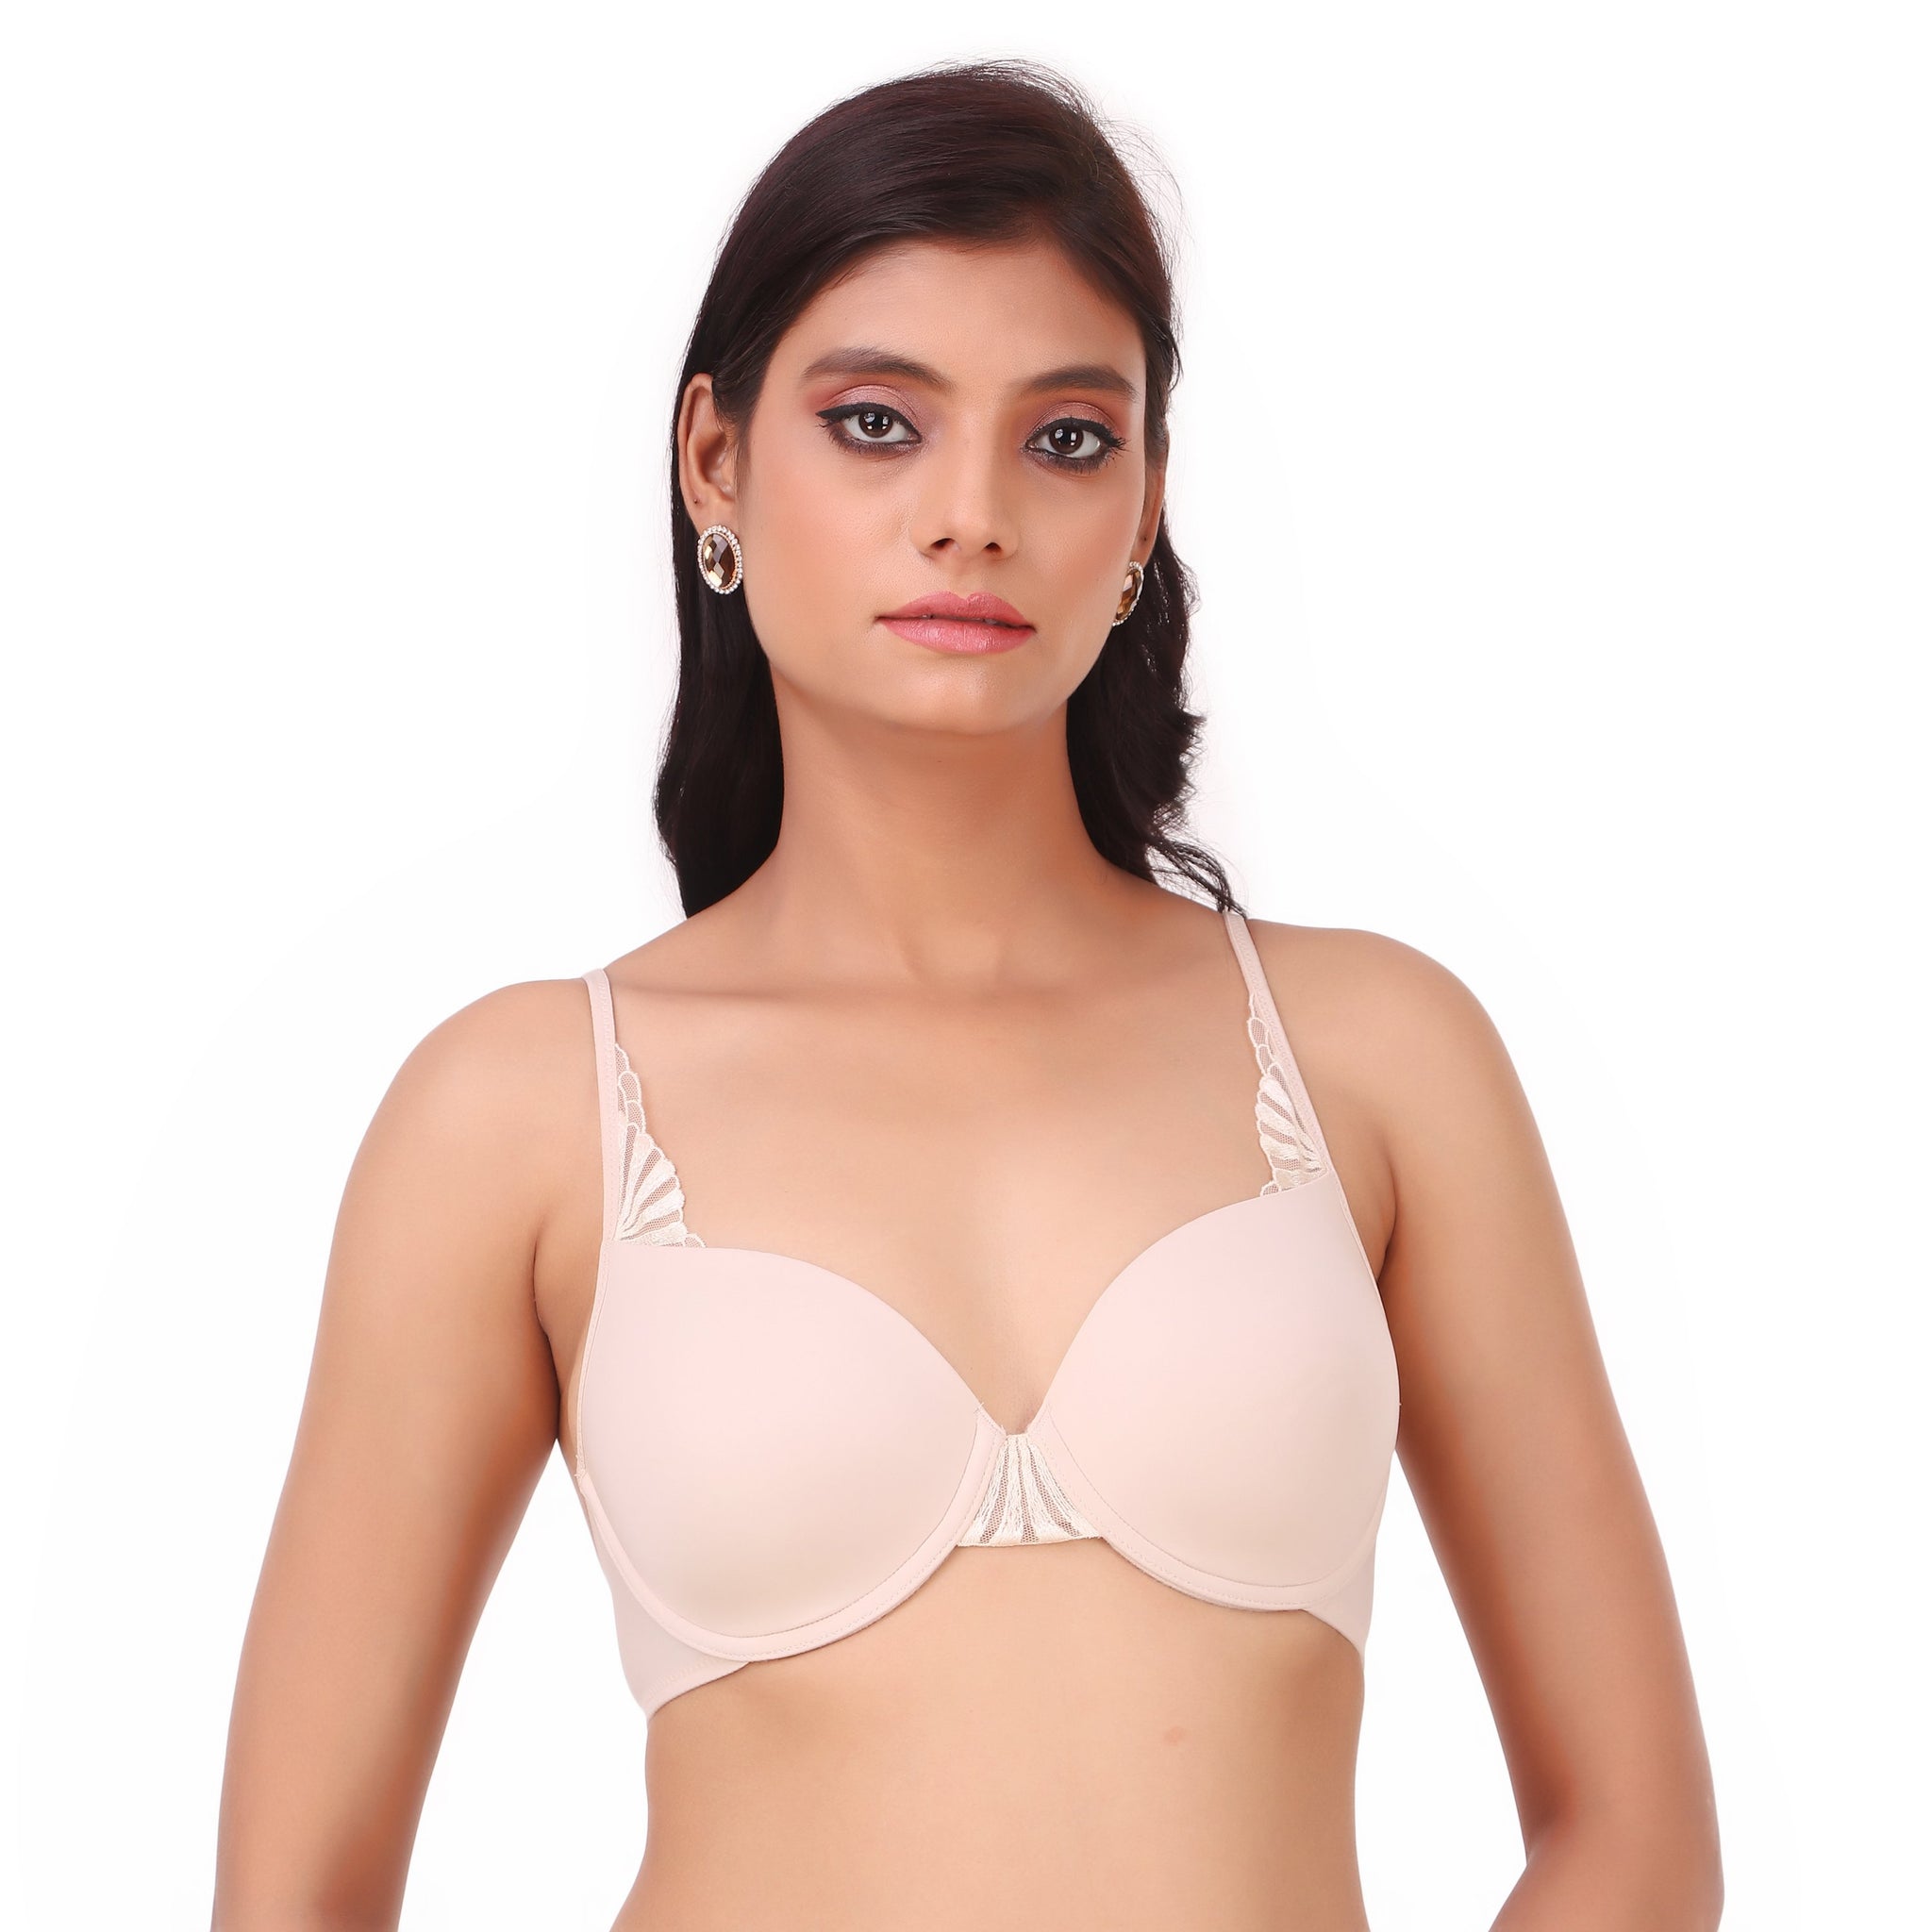 TRIUMPH-122I399 Women's Full Cup Padded Wired Bra